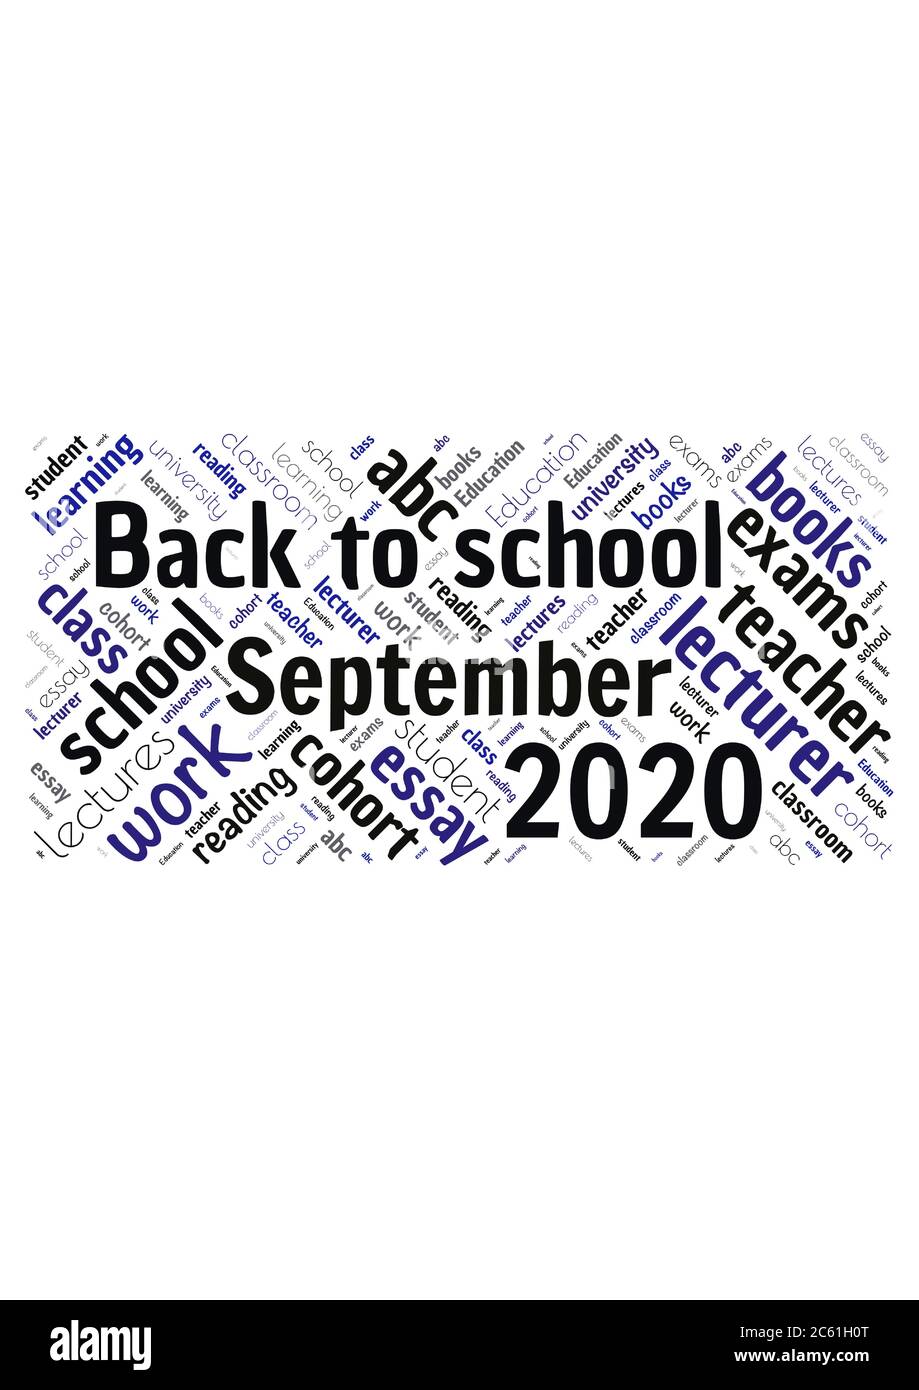 Illustration of a word cloud with words representing education and going back to school in September 2020 Stock Vector